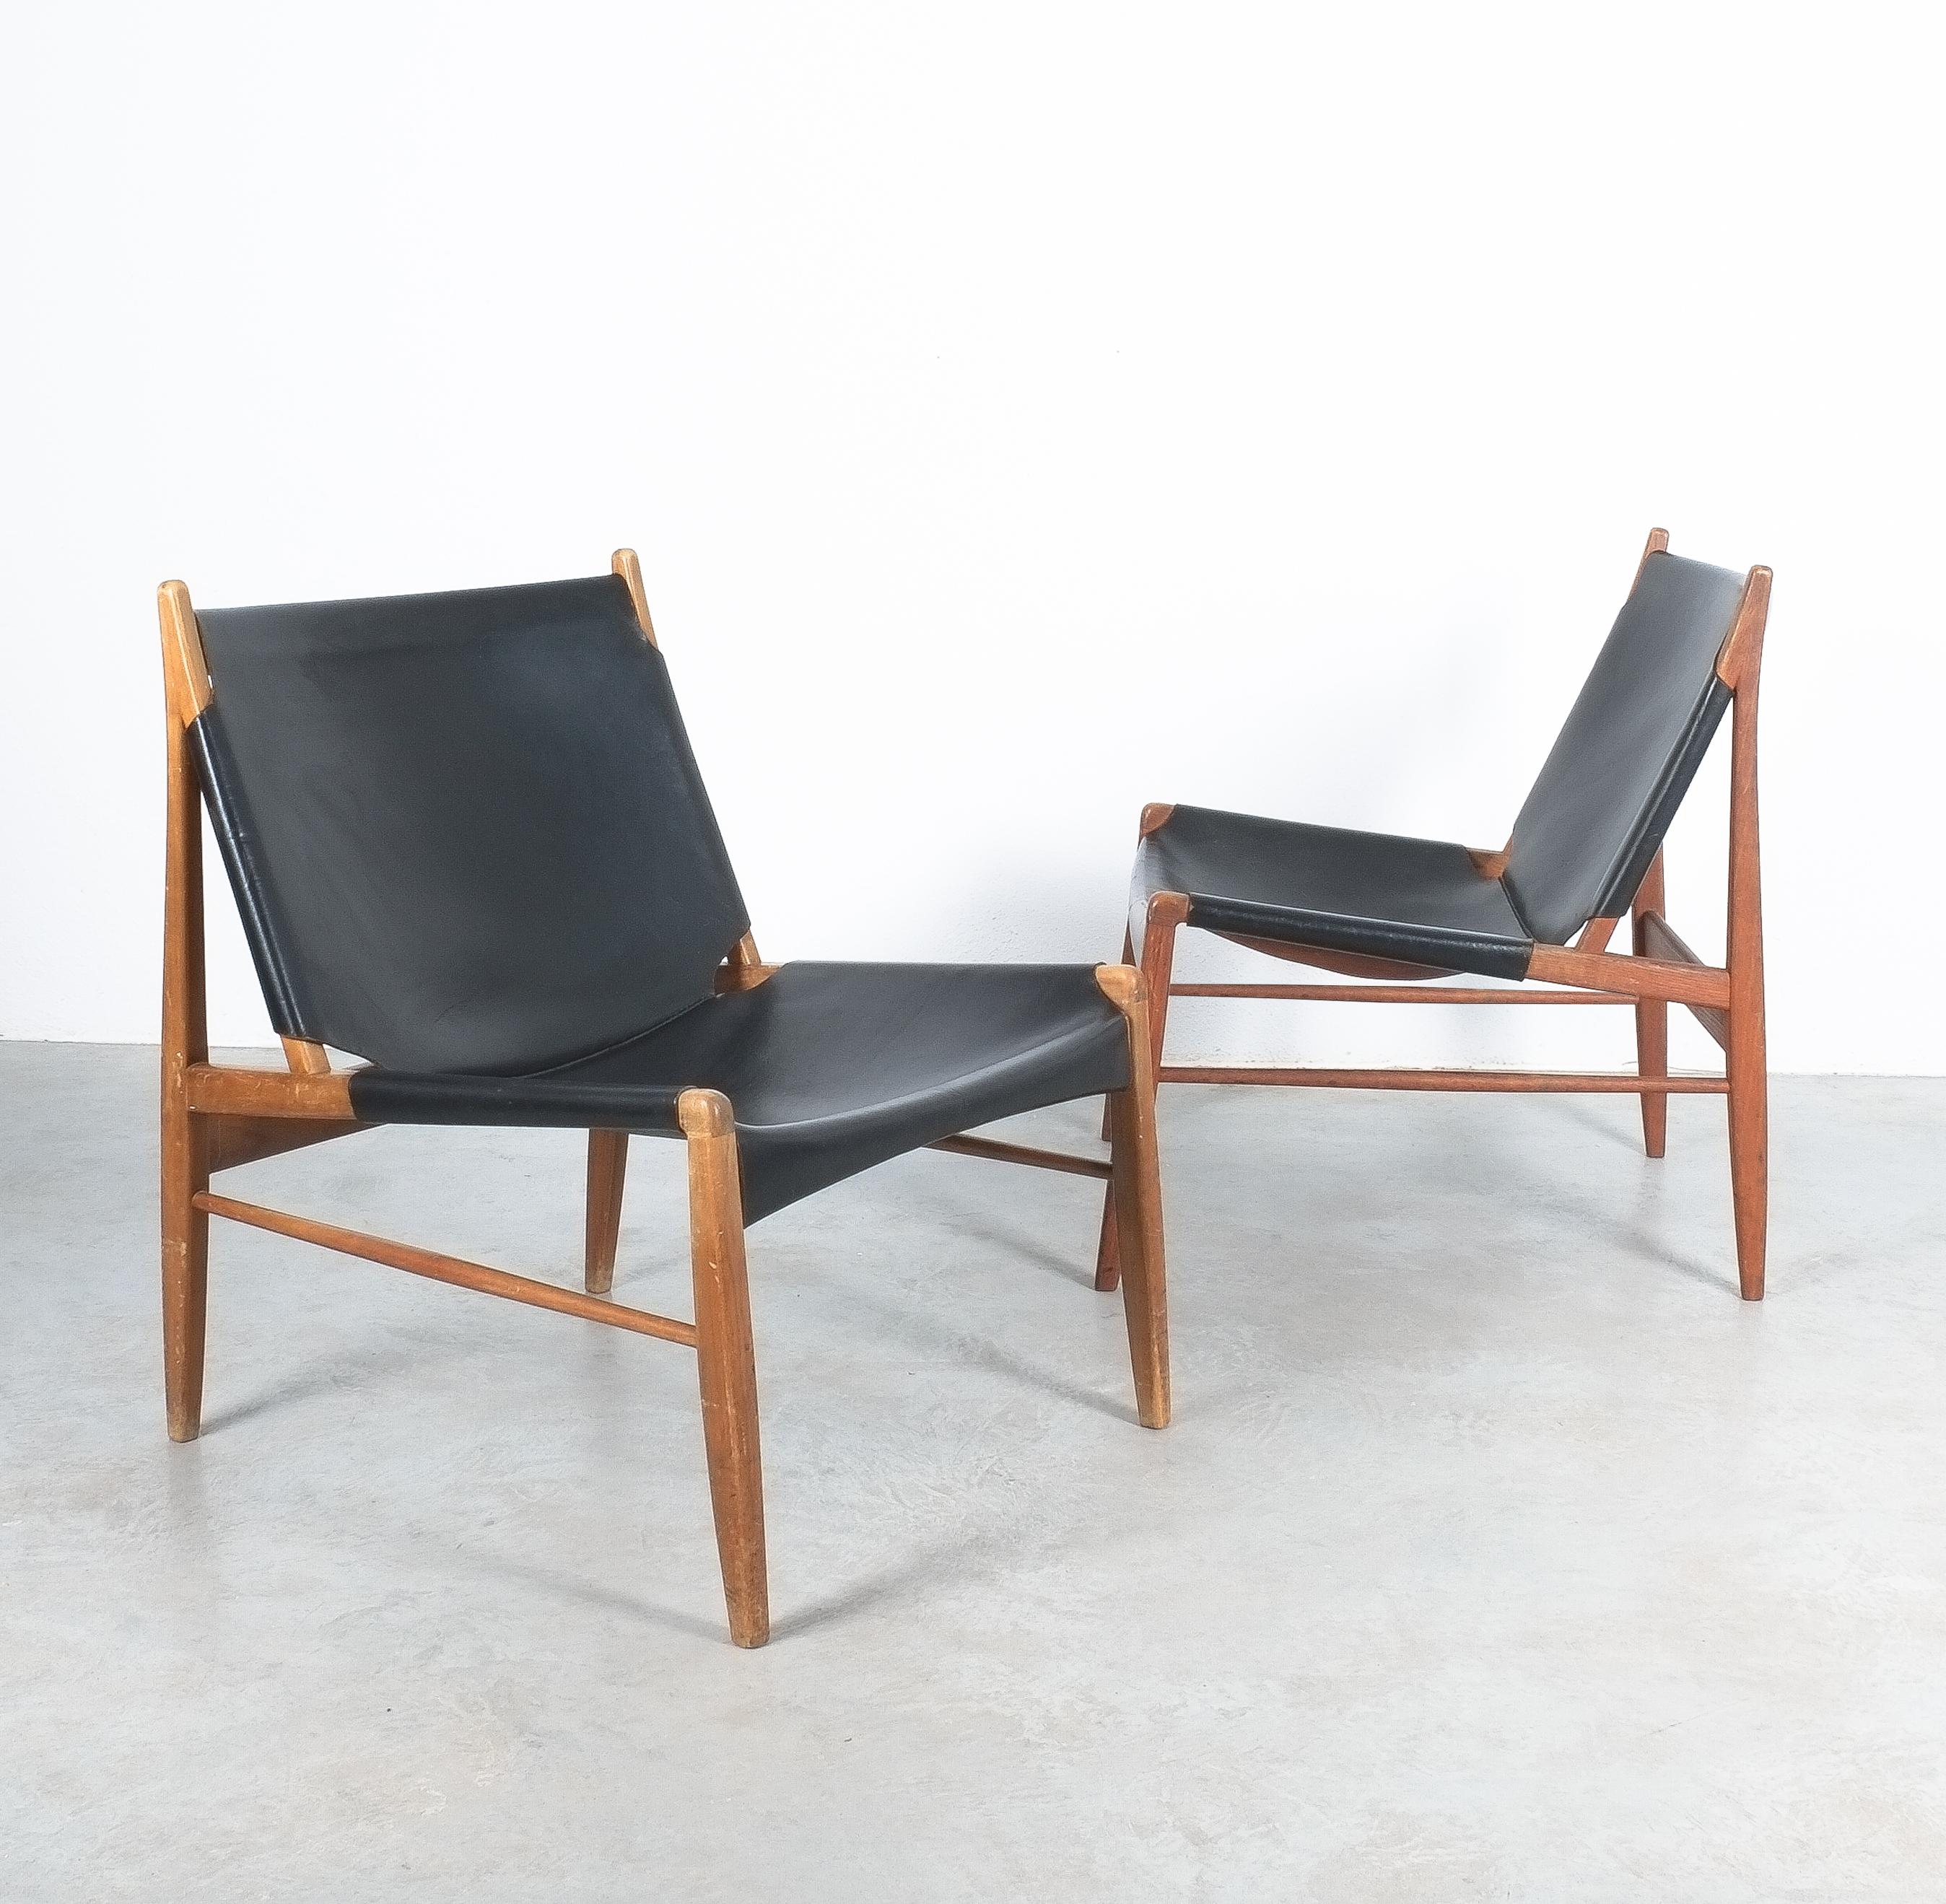 Pair of Franz Xaver Lutz hunting chairs, Munchner Werkstätten, 1958

Early hunting chair by Franz Xaver Lutz featuring a solid maple and a teak frame with the original sturdy black leather seat and backrest in good original condition. Very